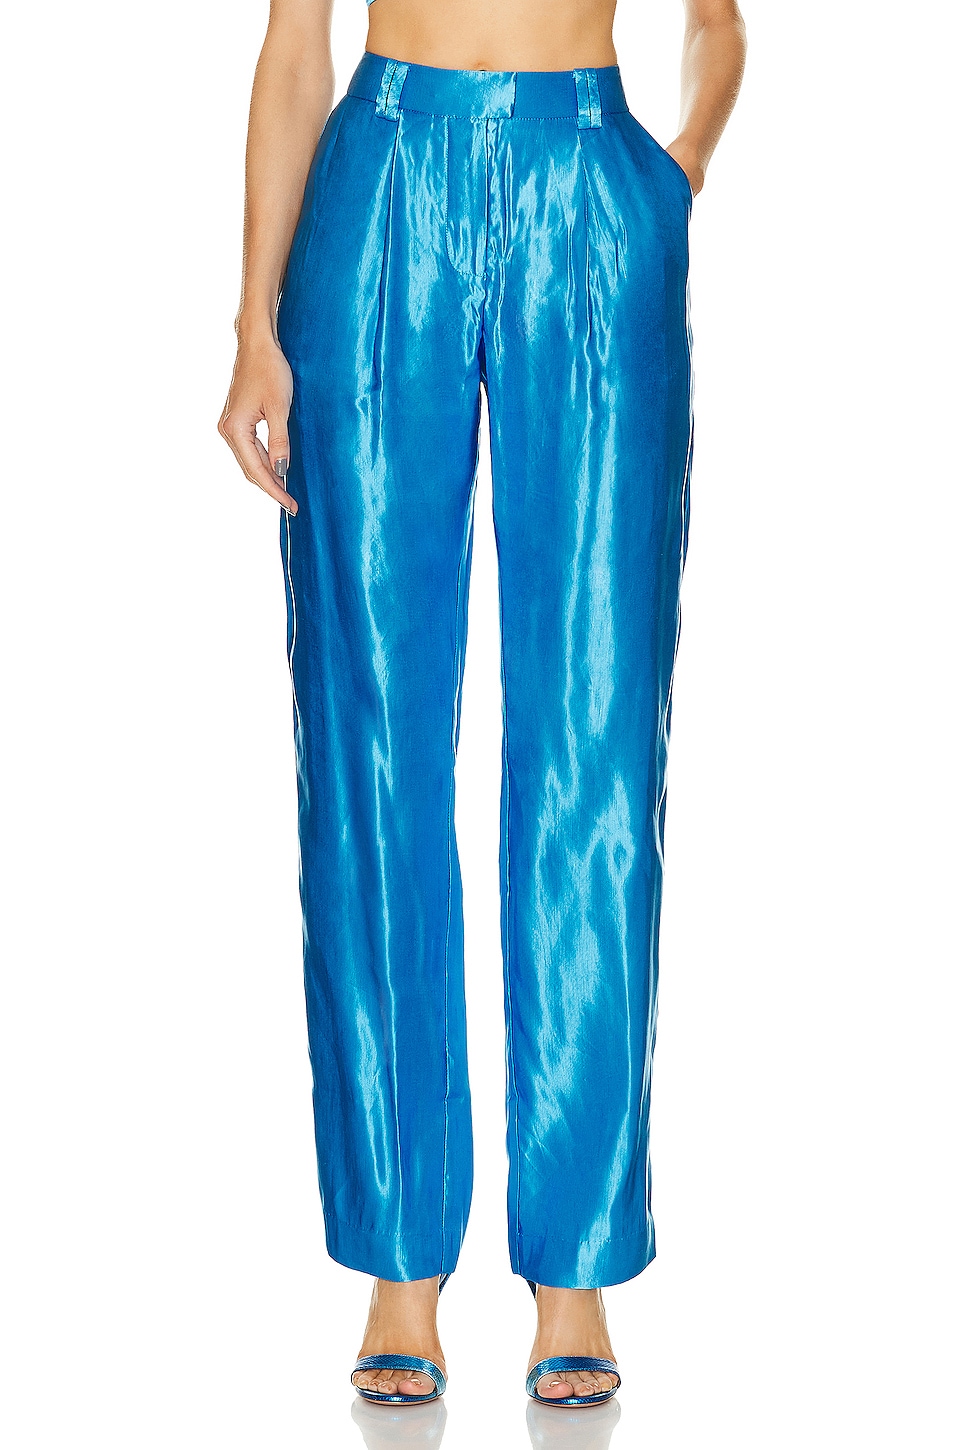 Image 1 of Aje Gracious Pant in Azure Blue